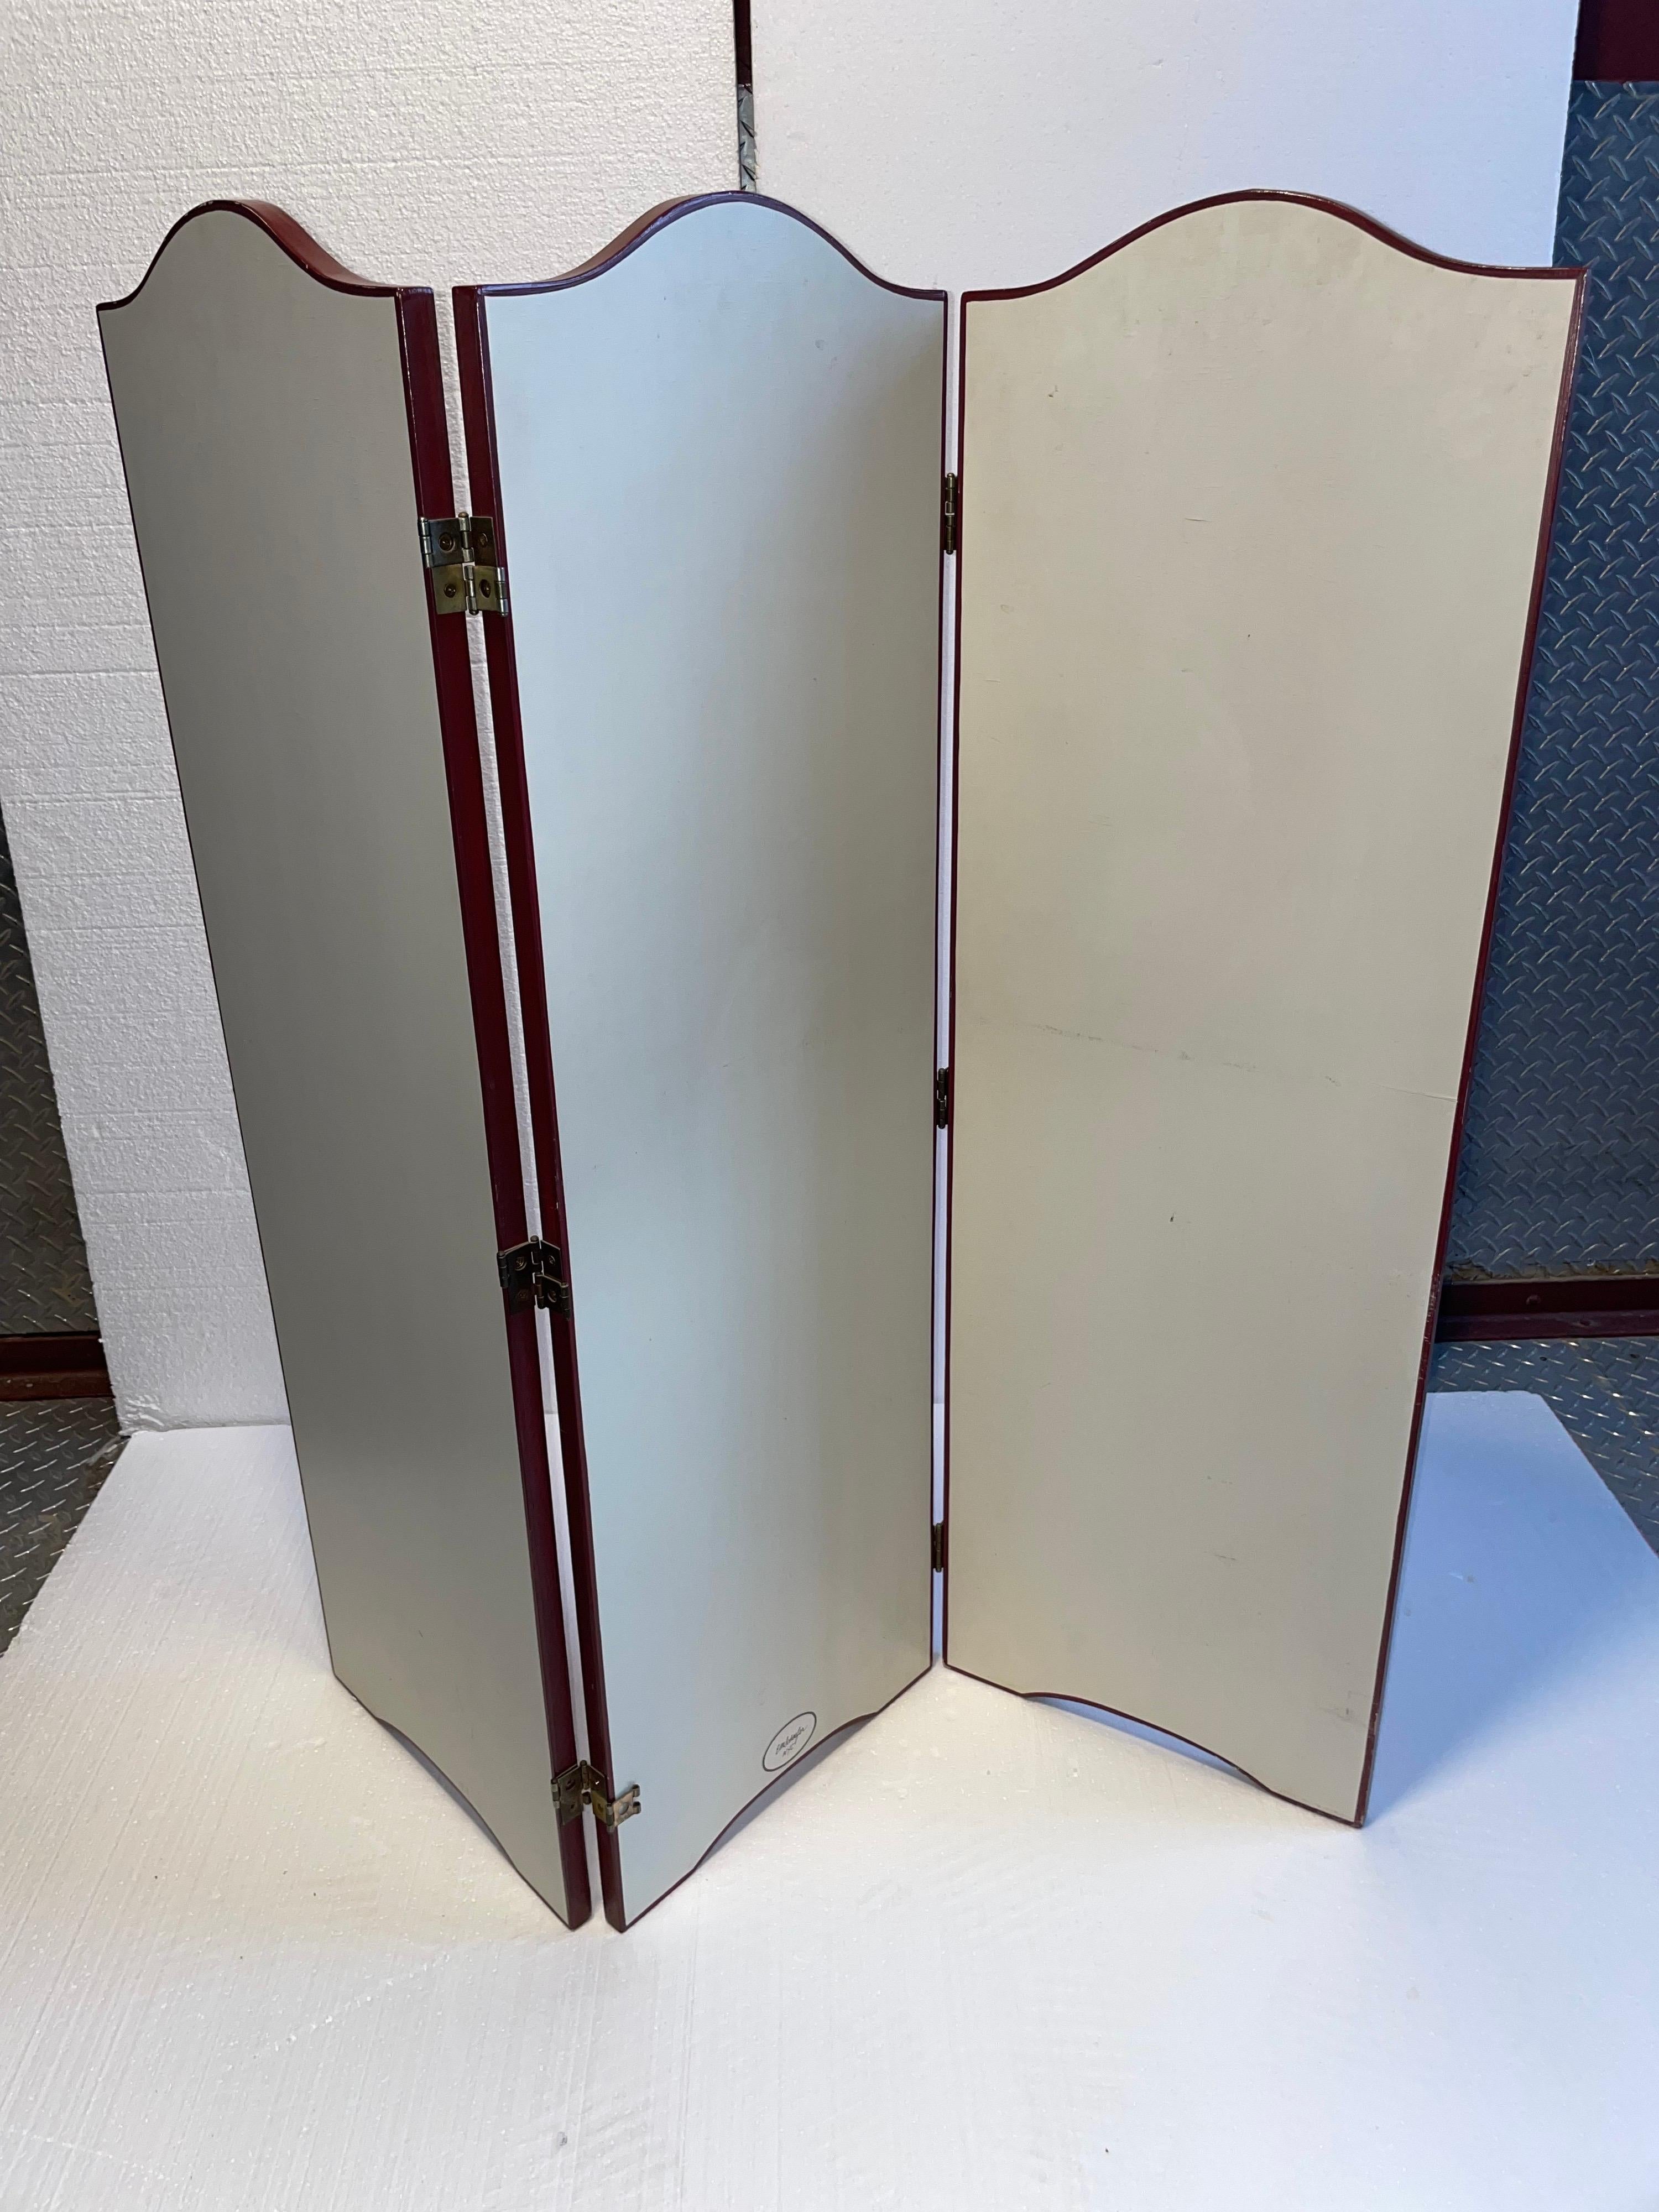 Artistic Hand Painted French Screen Divider in a Festive White and Deep Red For Sale 9